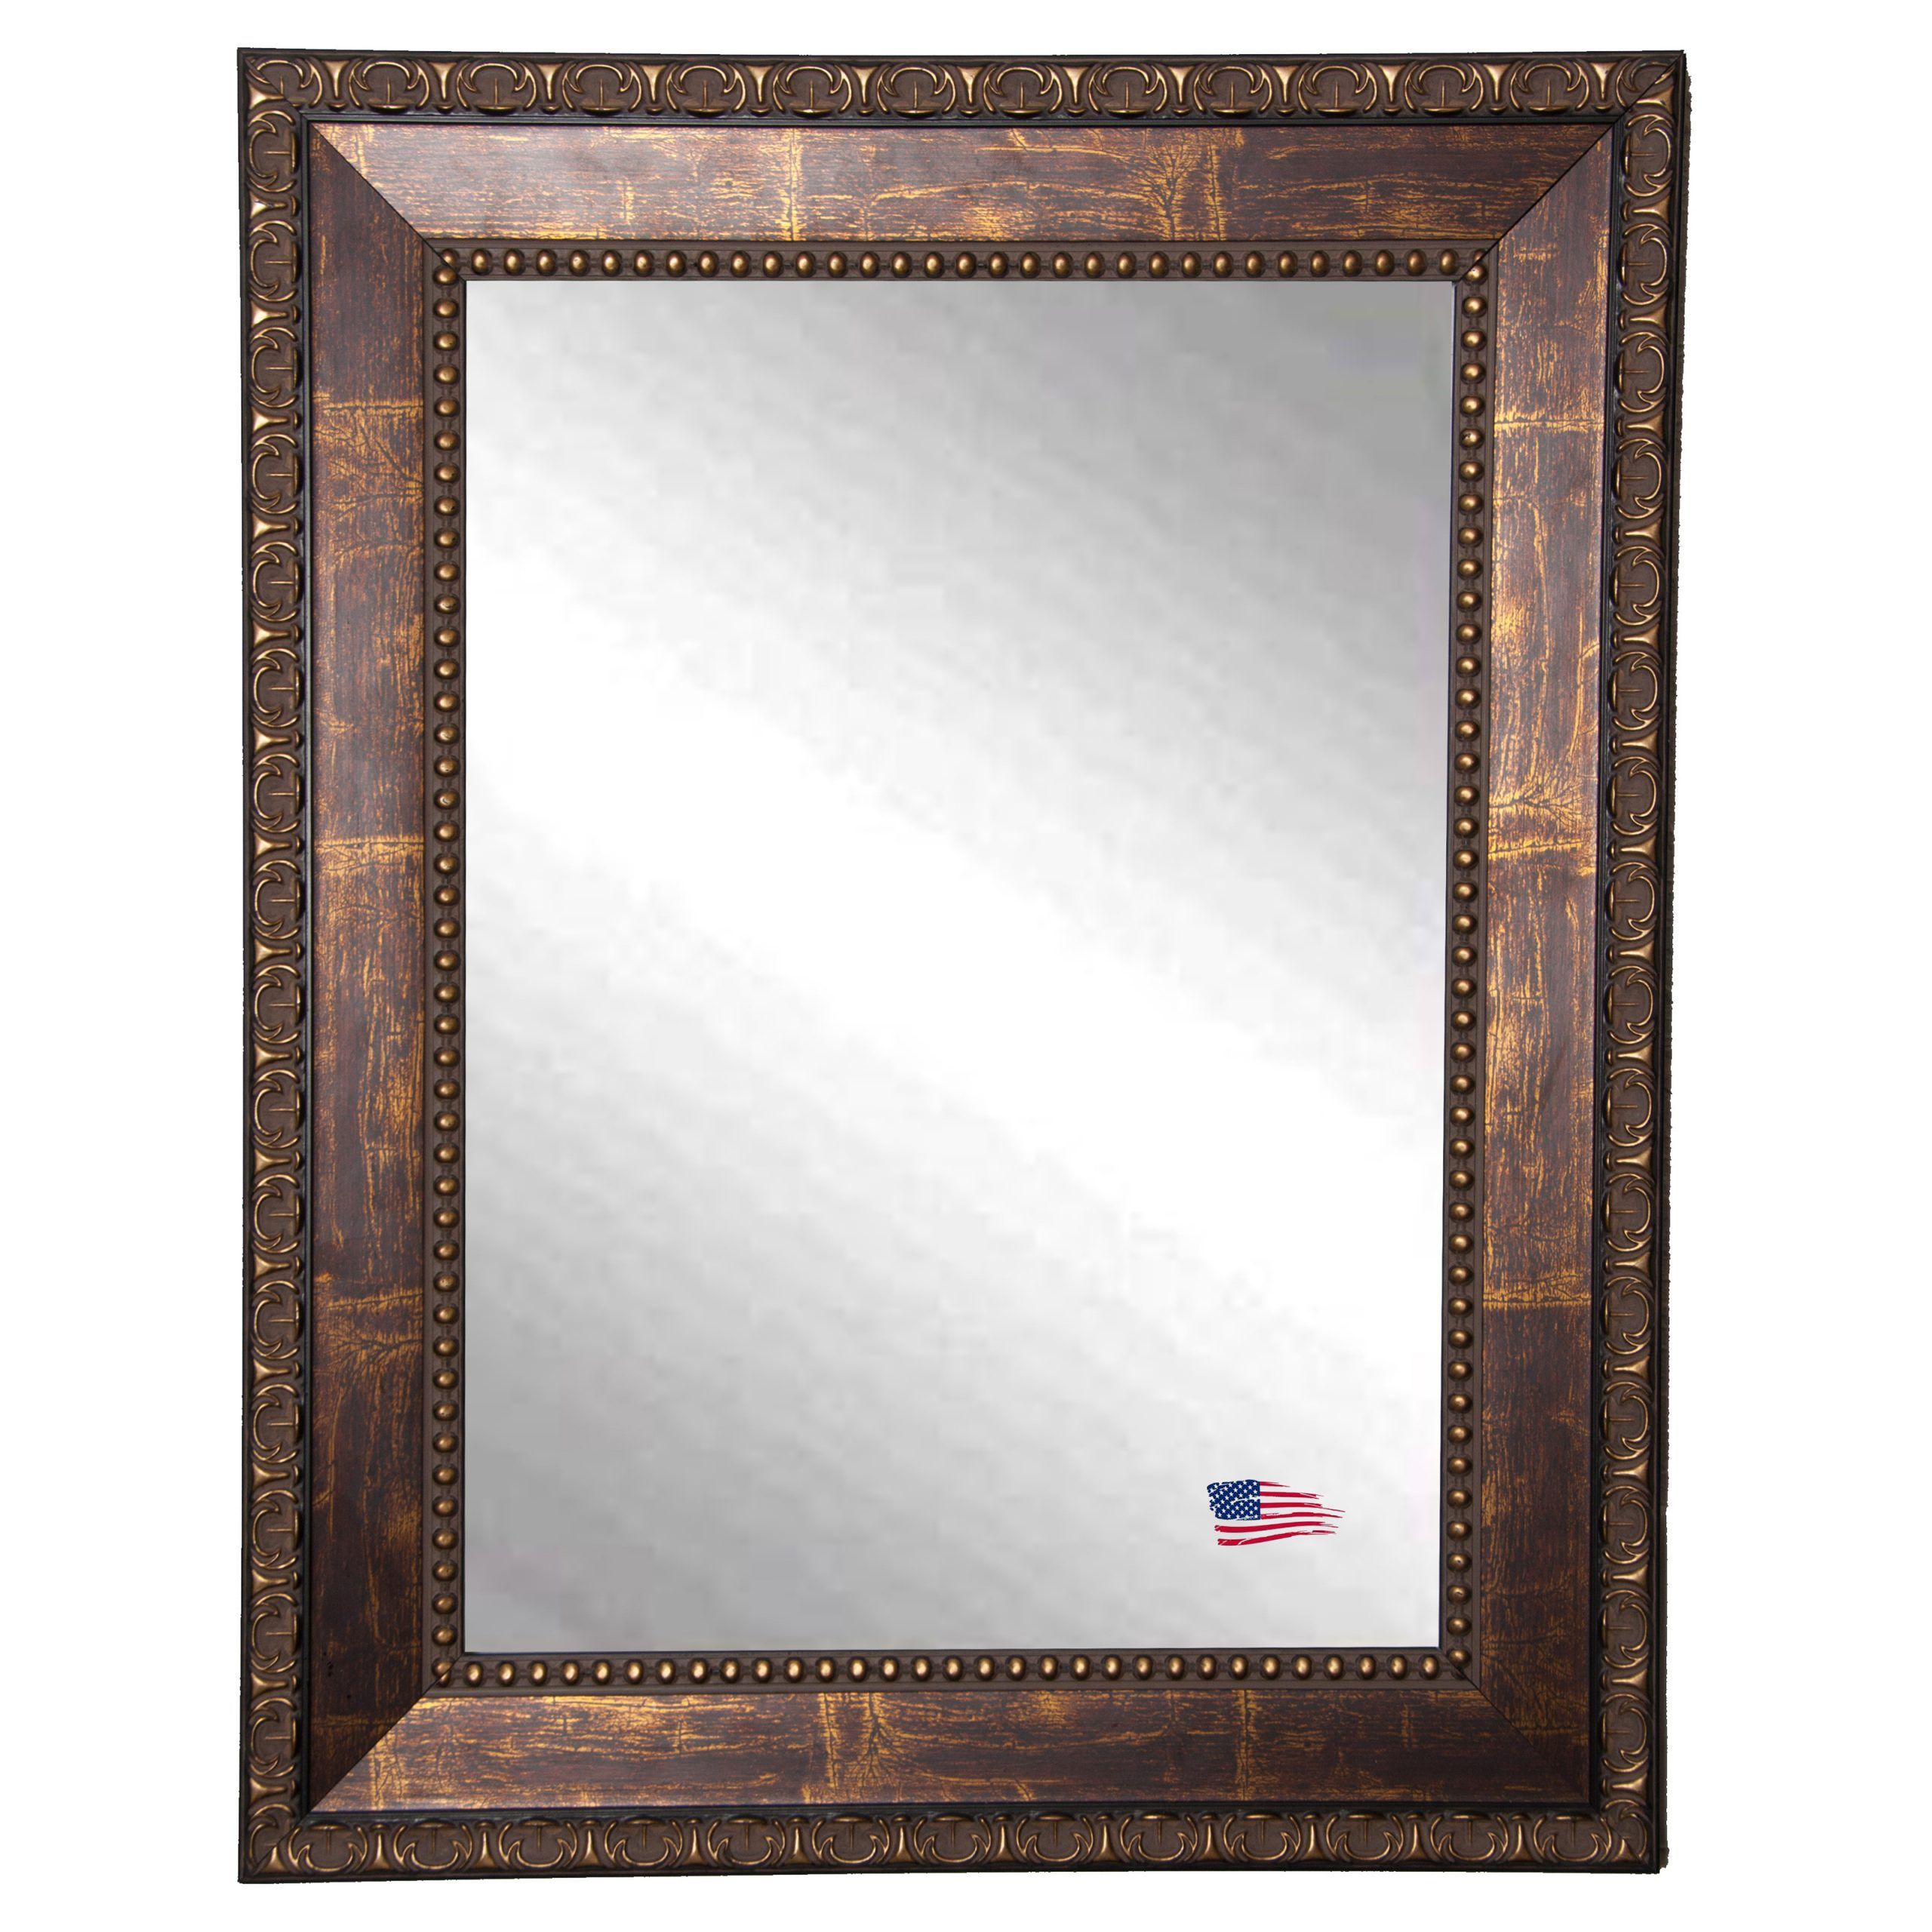 Rayne Mirrors Traditional Copper Bronze Wall Mirror – Mirrors At Hayneedle With Regard To Woven Bronze Metal Wall Mirrors (View 11 of 15)